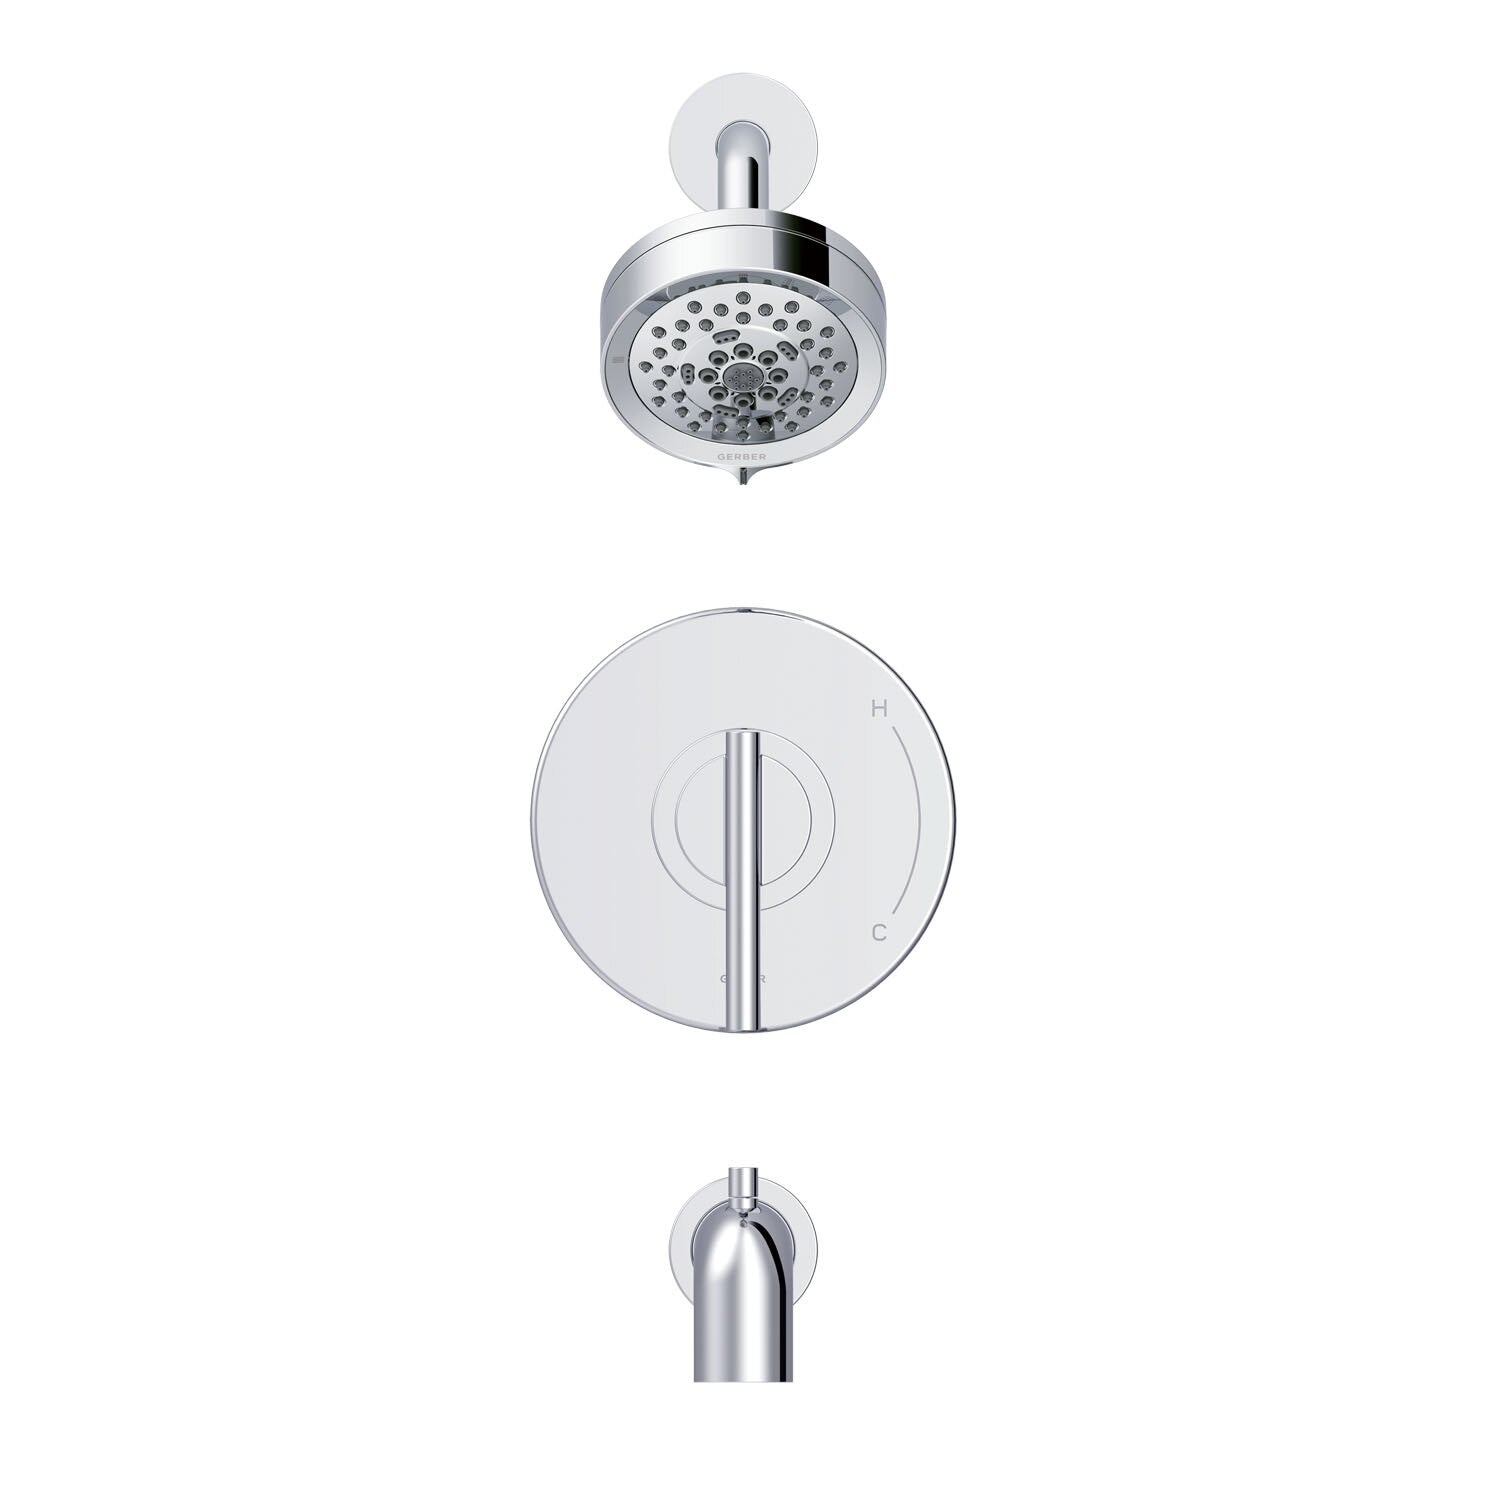 Danze by Gerber Parma 1H Tub and Shower Trim Kit and Treysta Cartridge W/ Diverter On Tub Spout and 5 Function Showerhead 1.75gpm